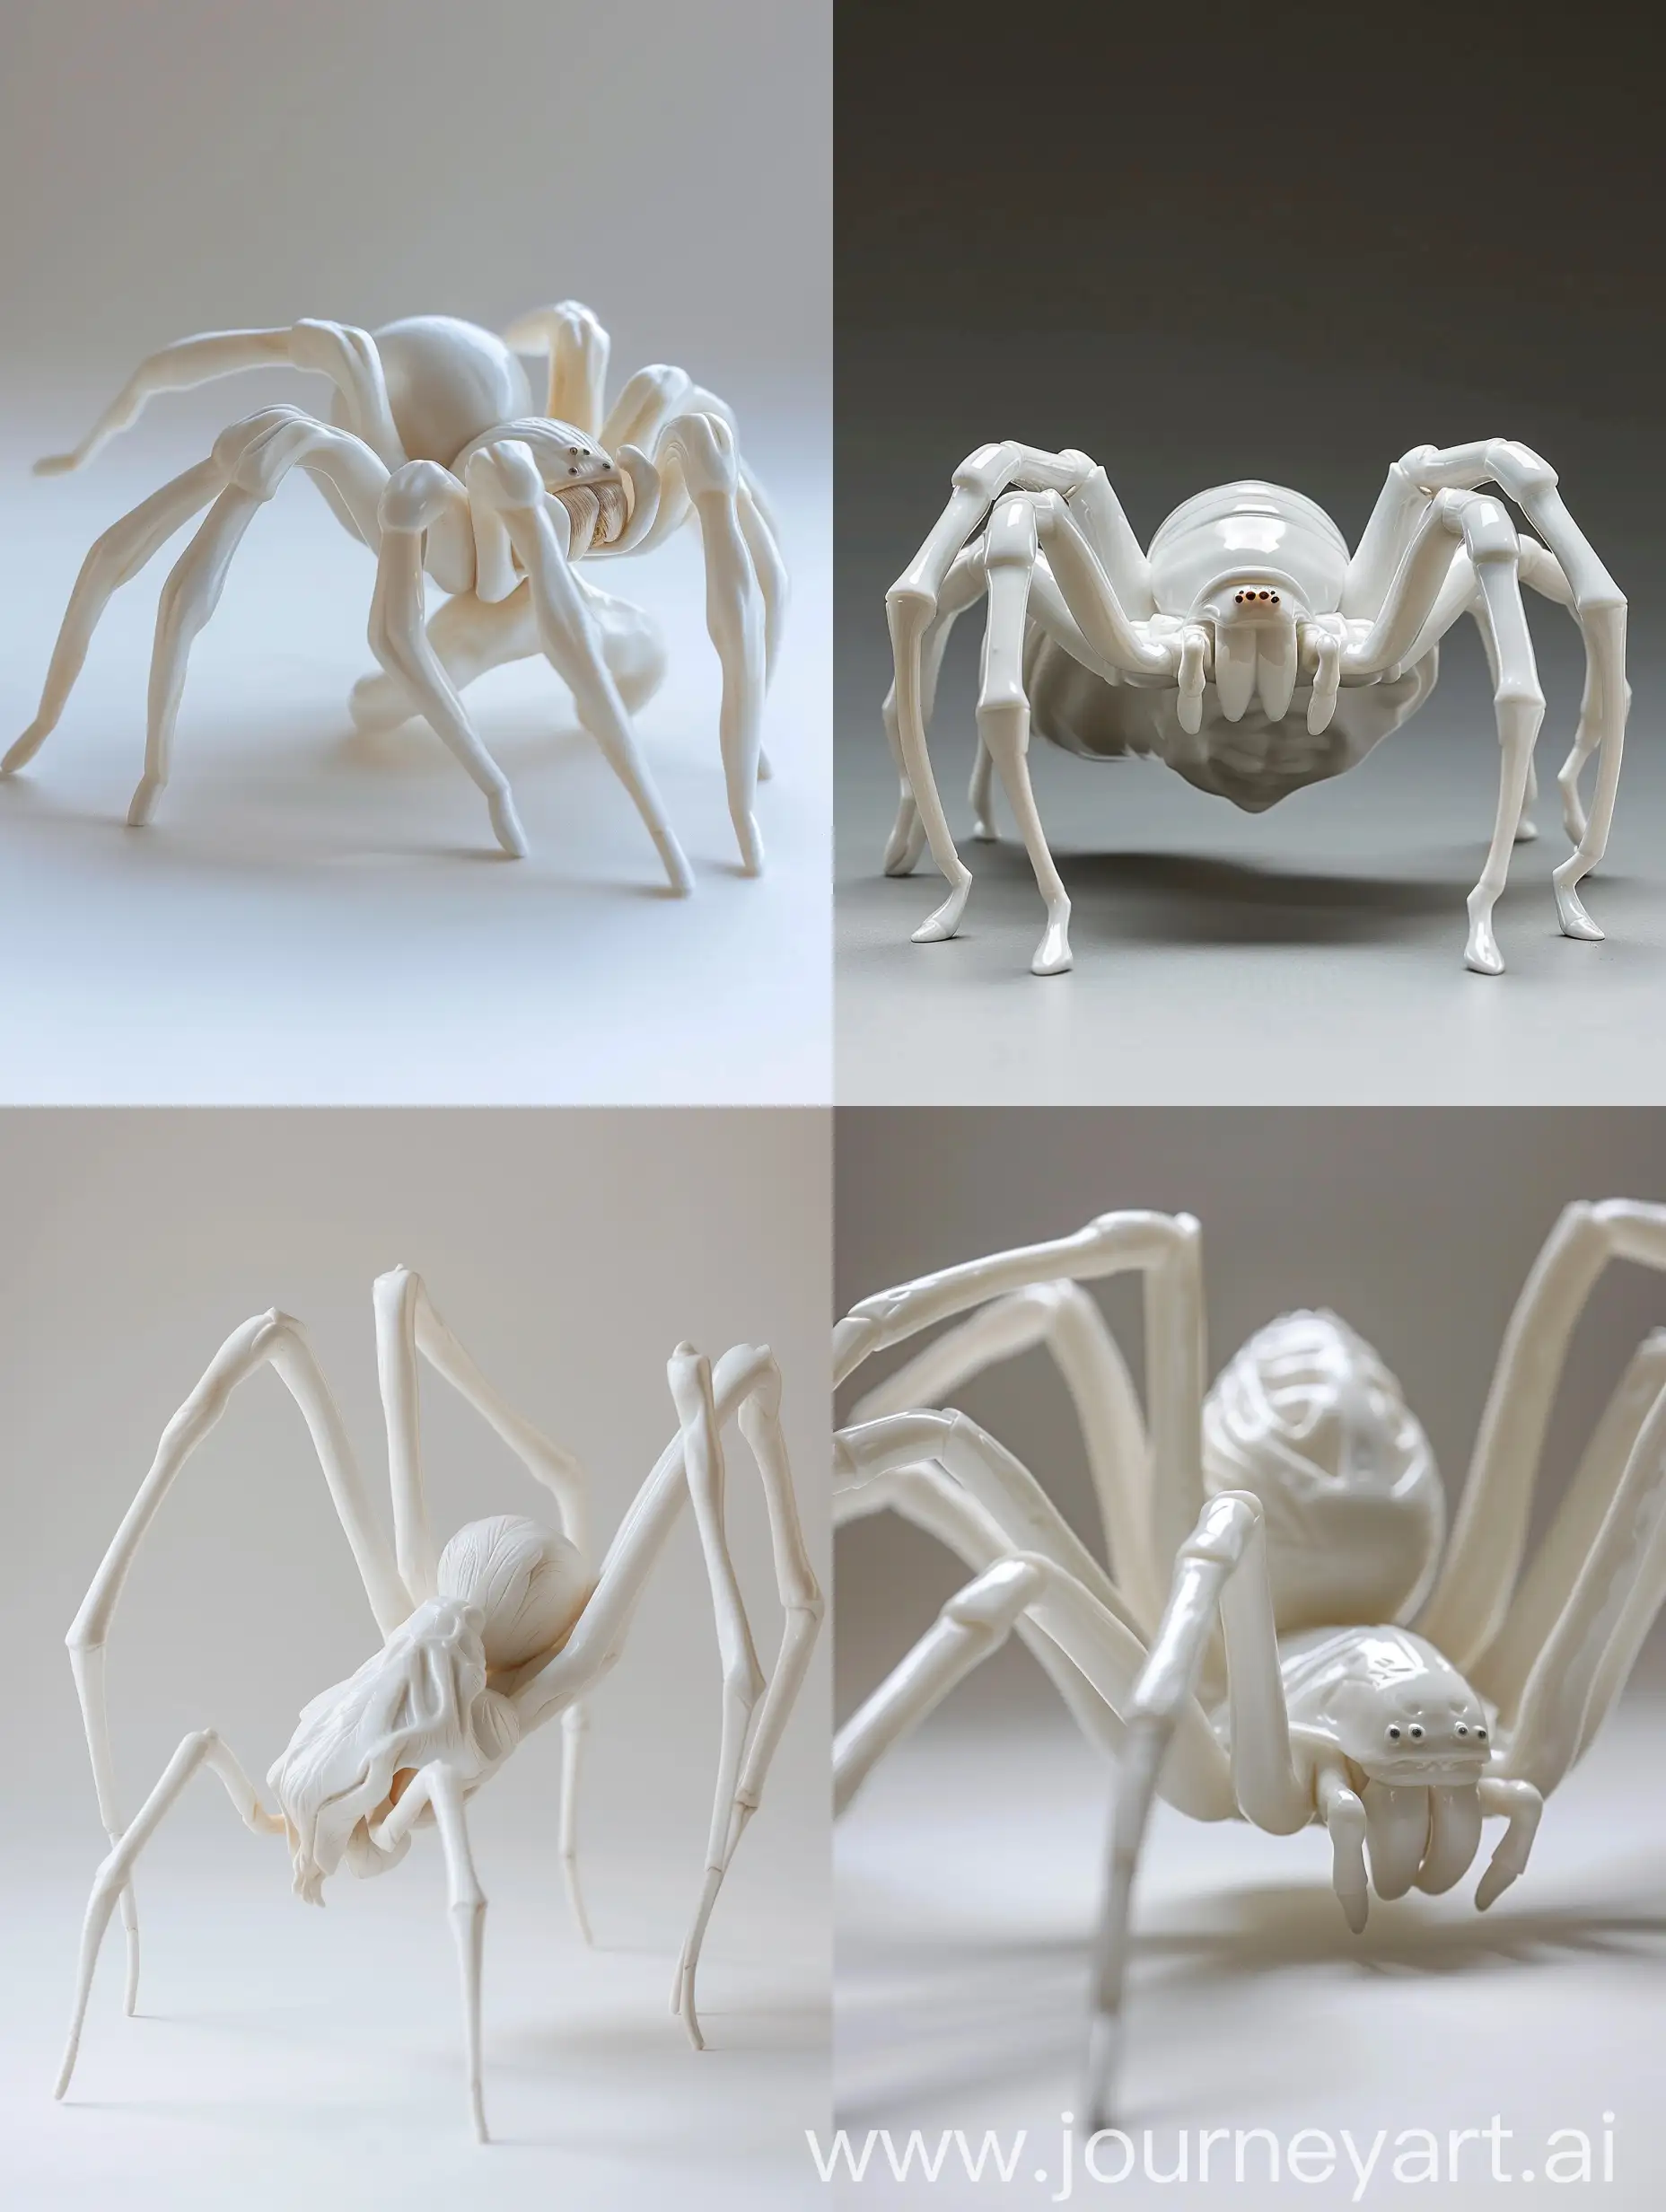 Porcelain-Spider-Sculpture-in-Japanese-Style